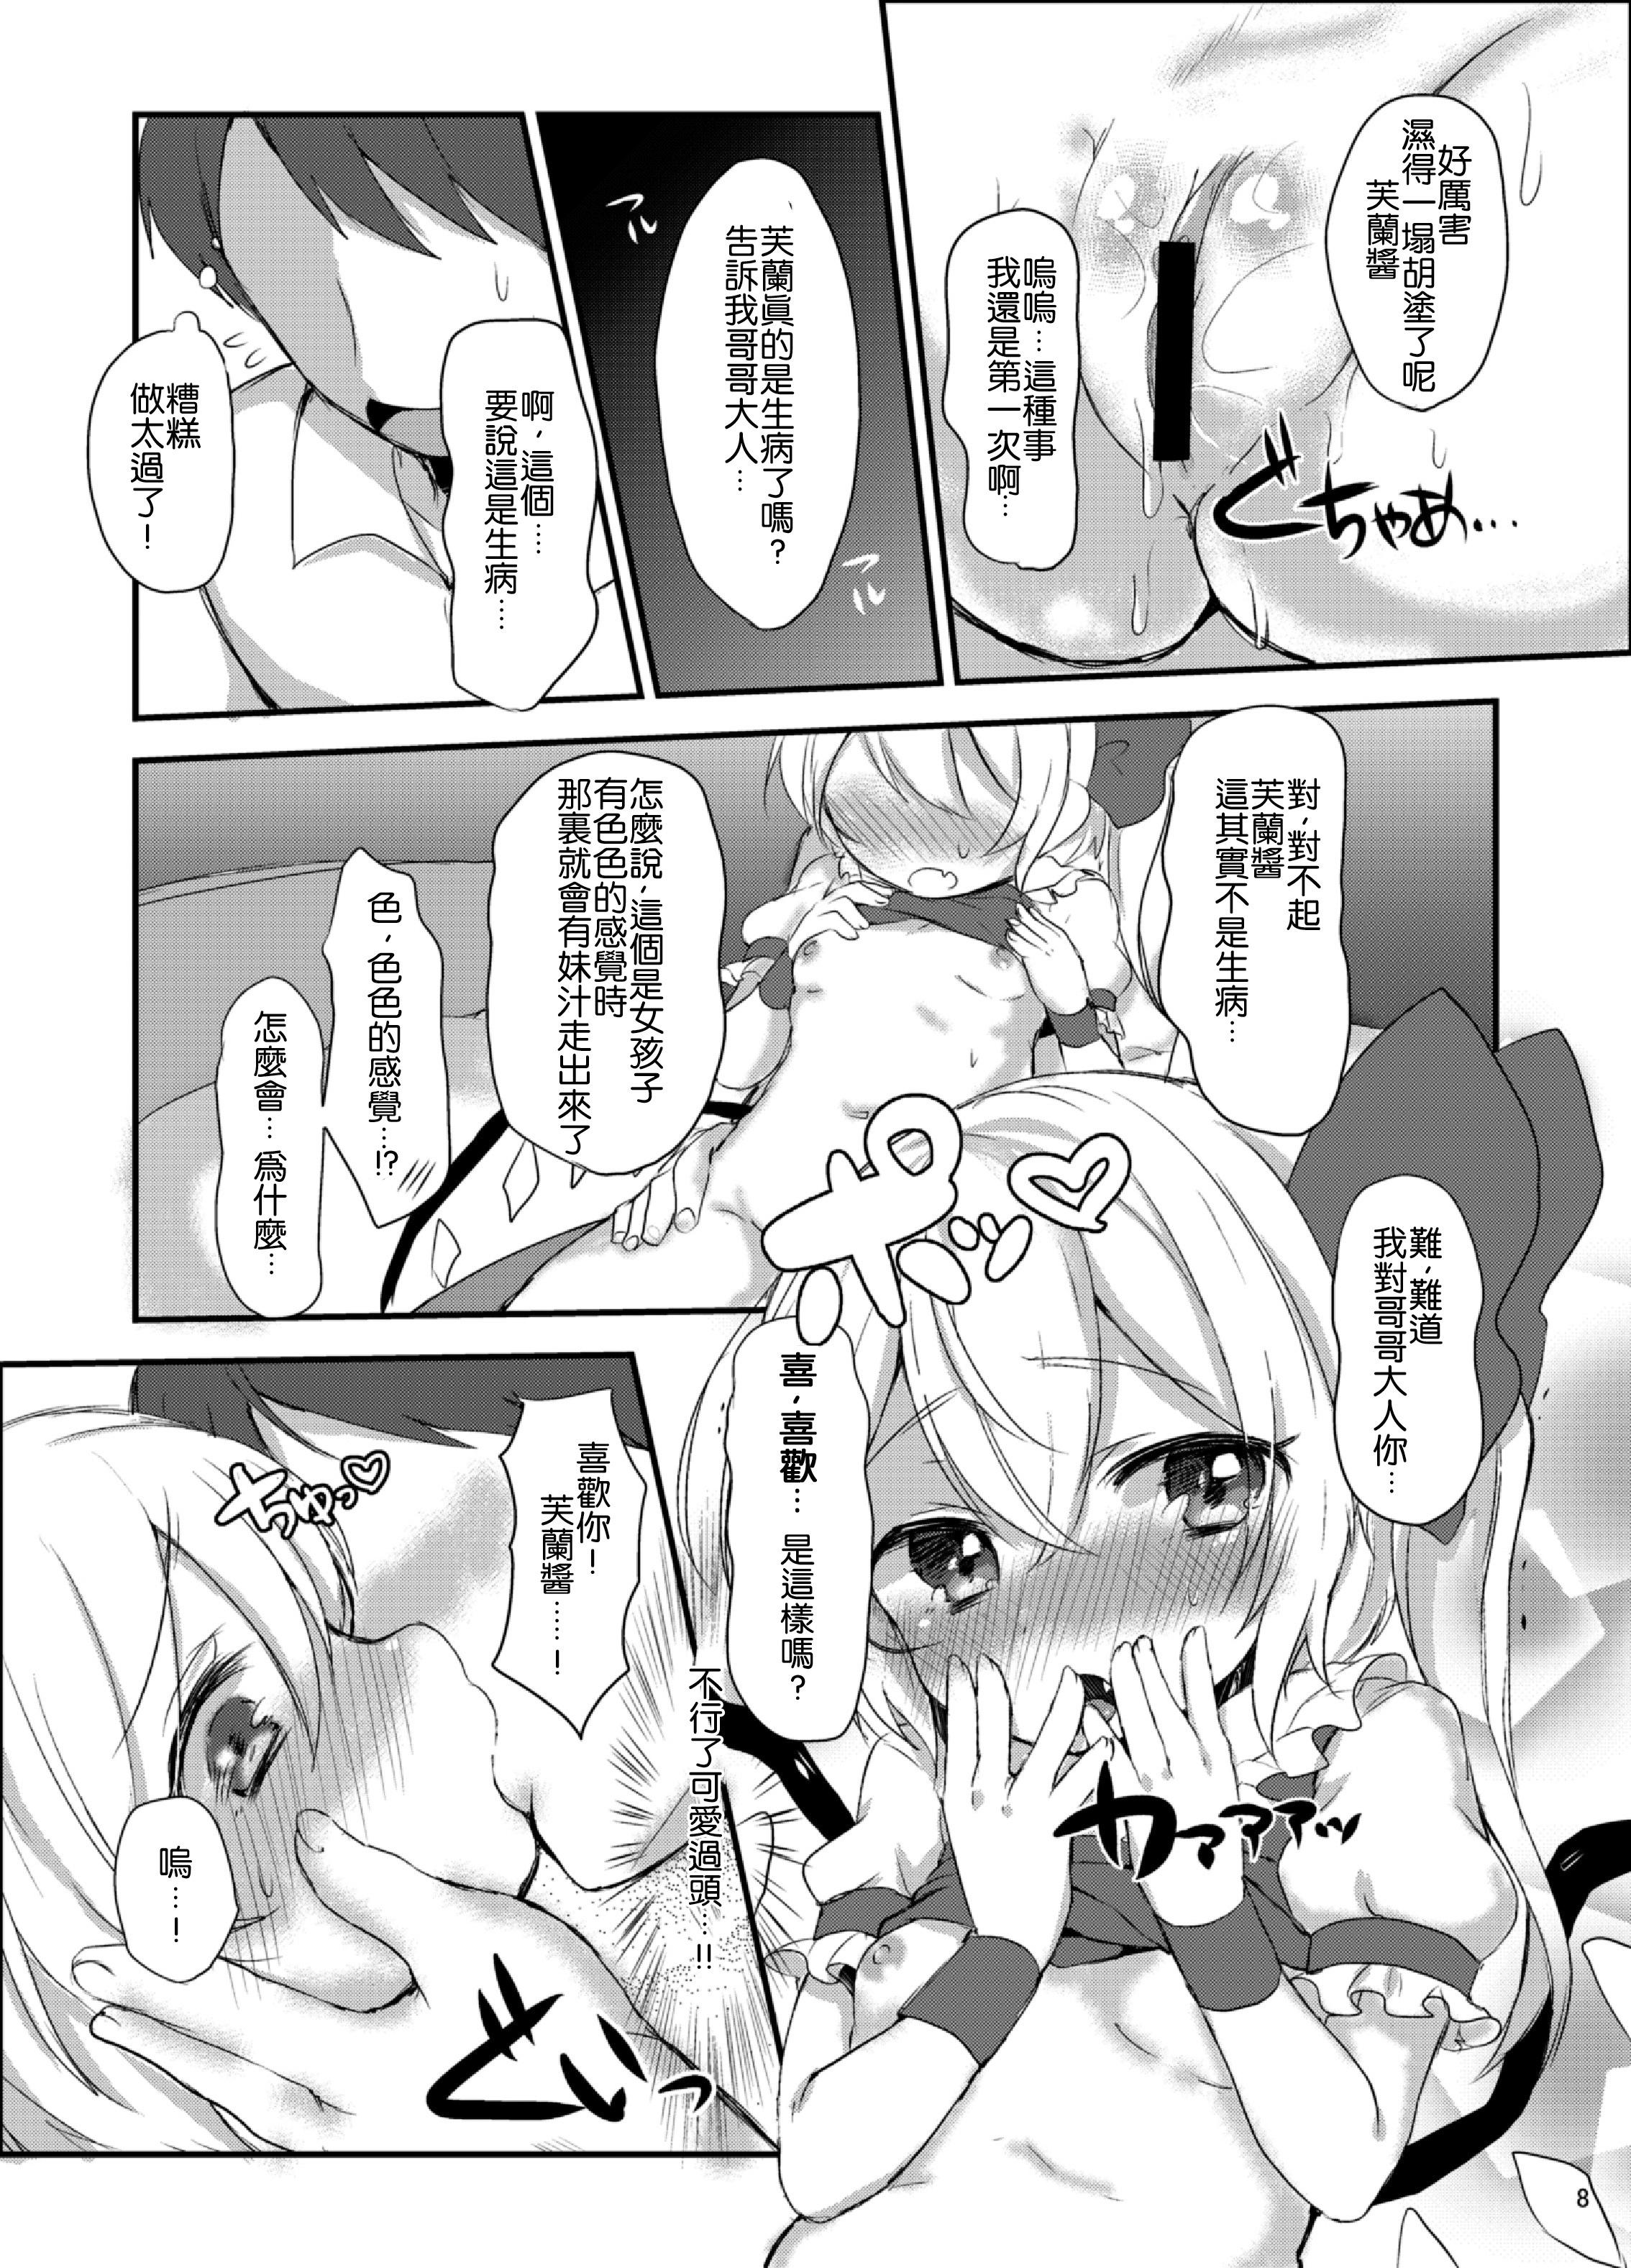 Hotporn Flan-chan Hajimete no ♥♥♥ - Touhou project Submissive - Page 8